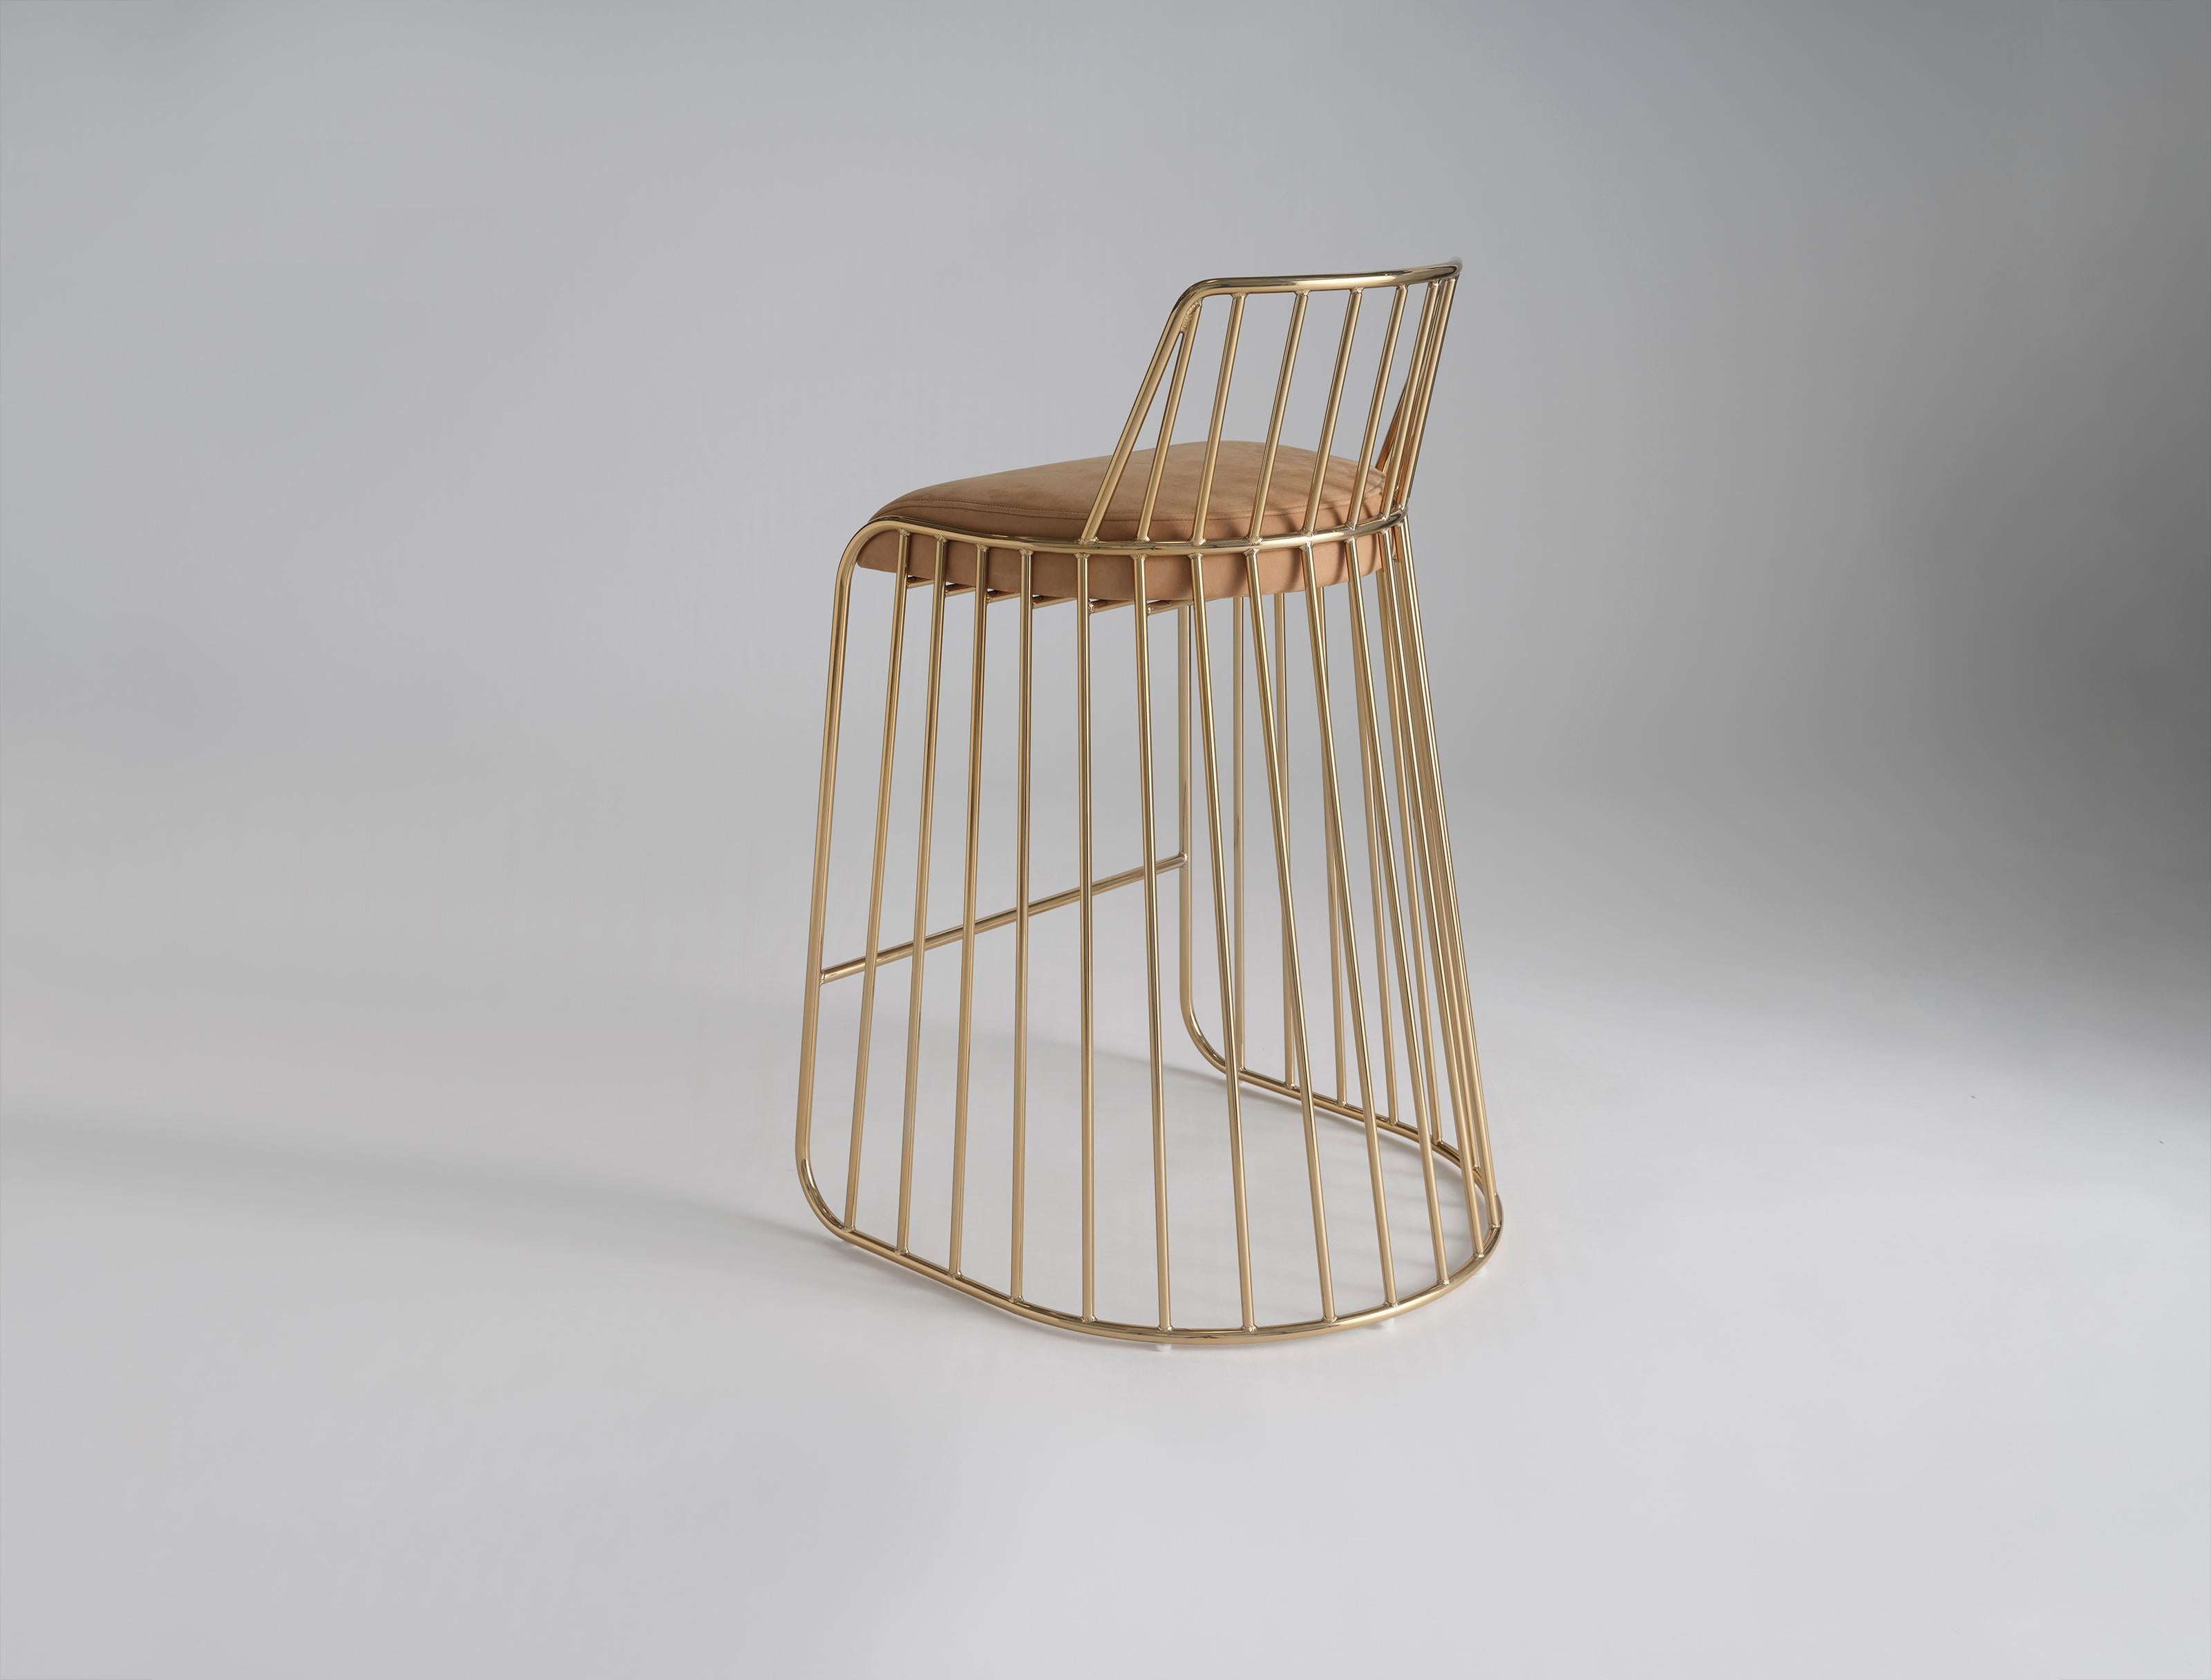 Bride’s Veil Counter Stool With Back by Phase Design
Dimensions: D 52,1 x W 53,3 x H 83,8 cm.
Materials: Upholstery, steel and smoked brass.

Solid steel bar available in a smoked brass, polished chrome, burnt copper, or powder coat finish with